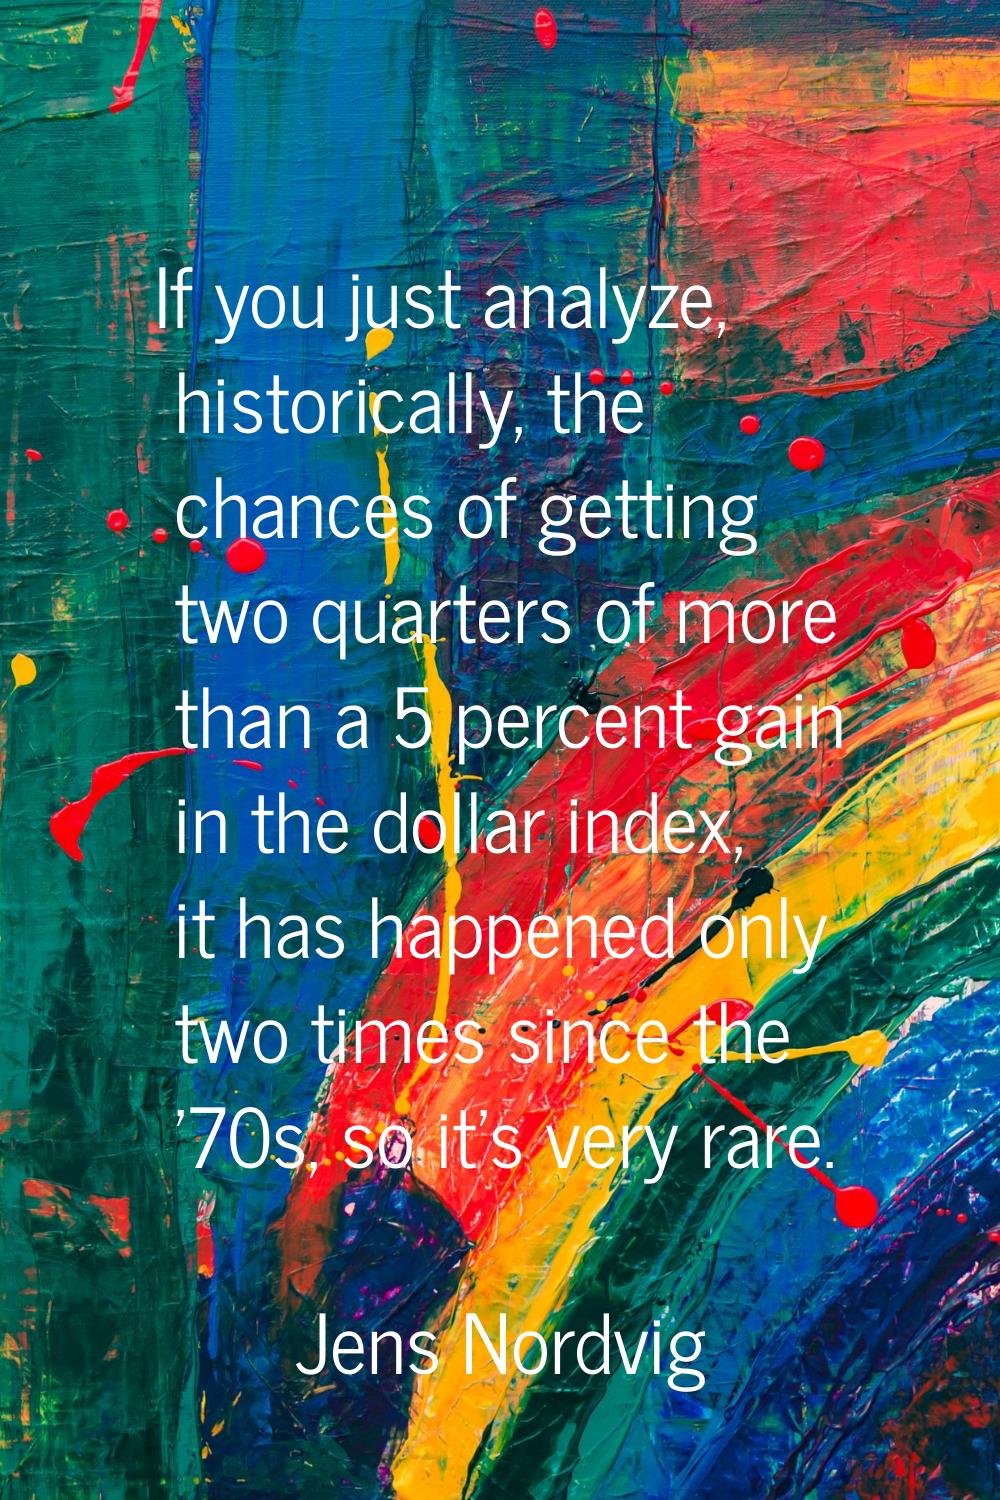 If you just analyze, historically, the chances of getting two quarters of more than a 5 percent gai